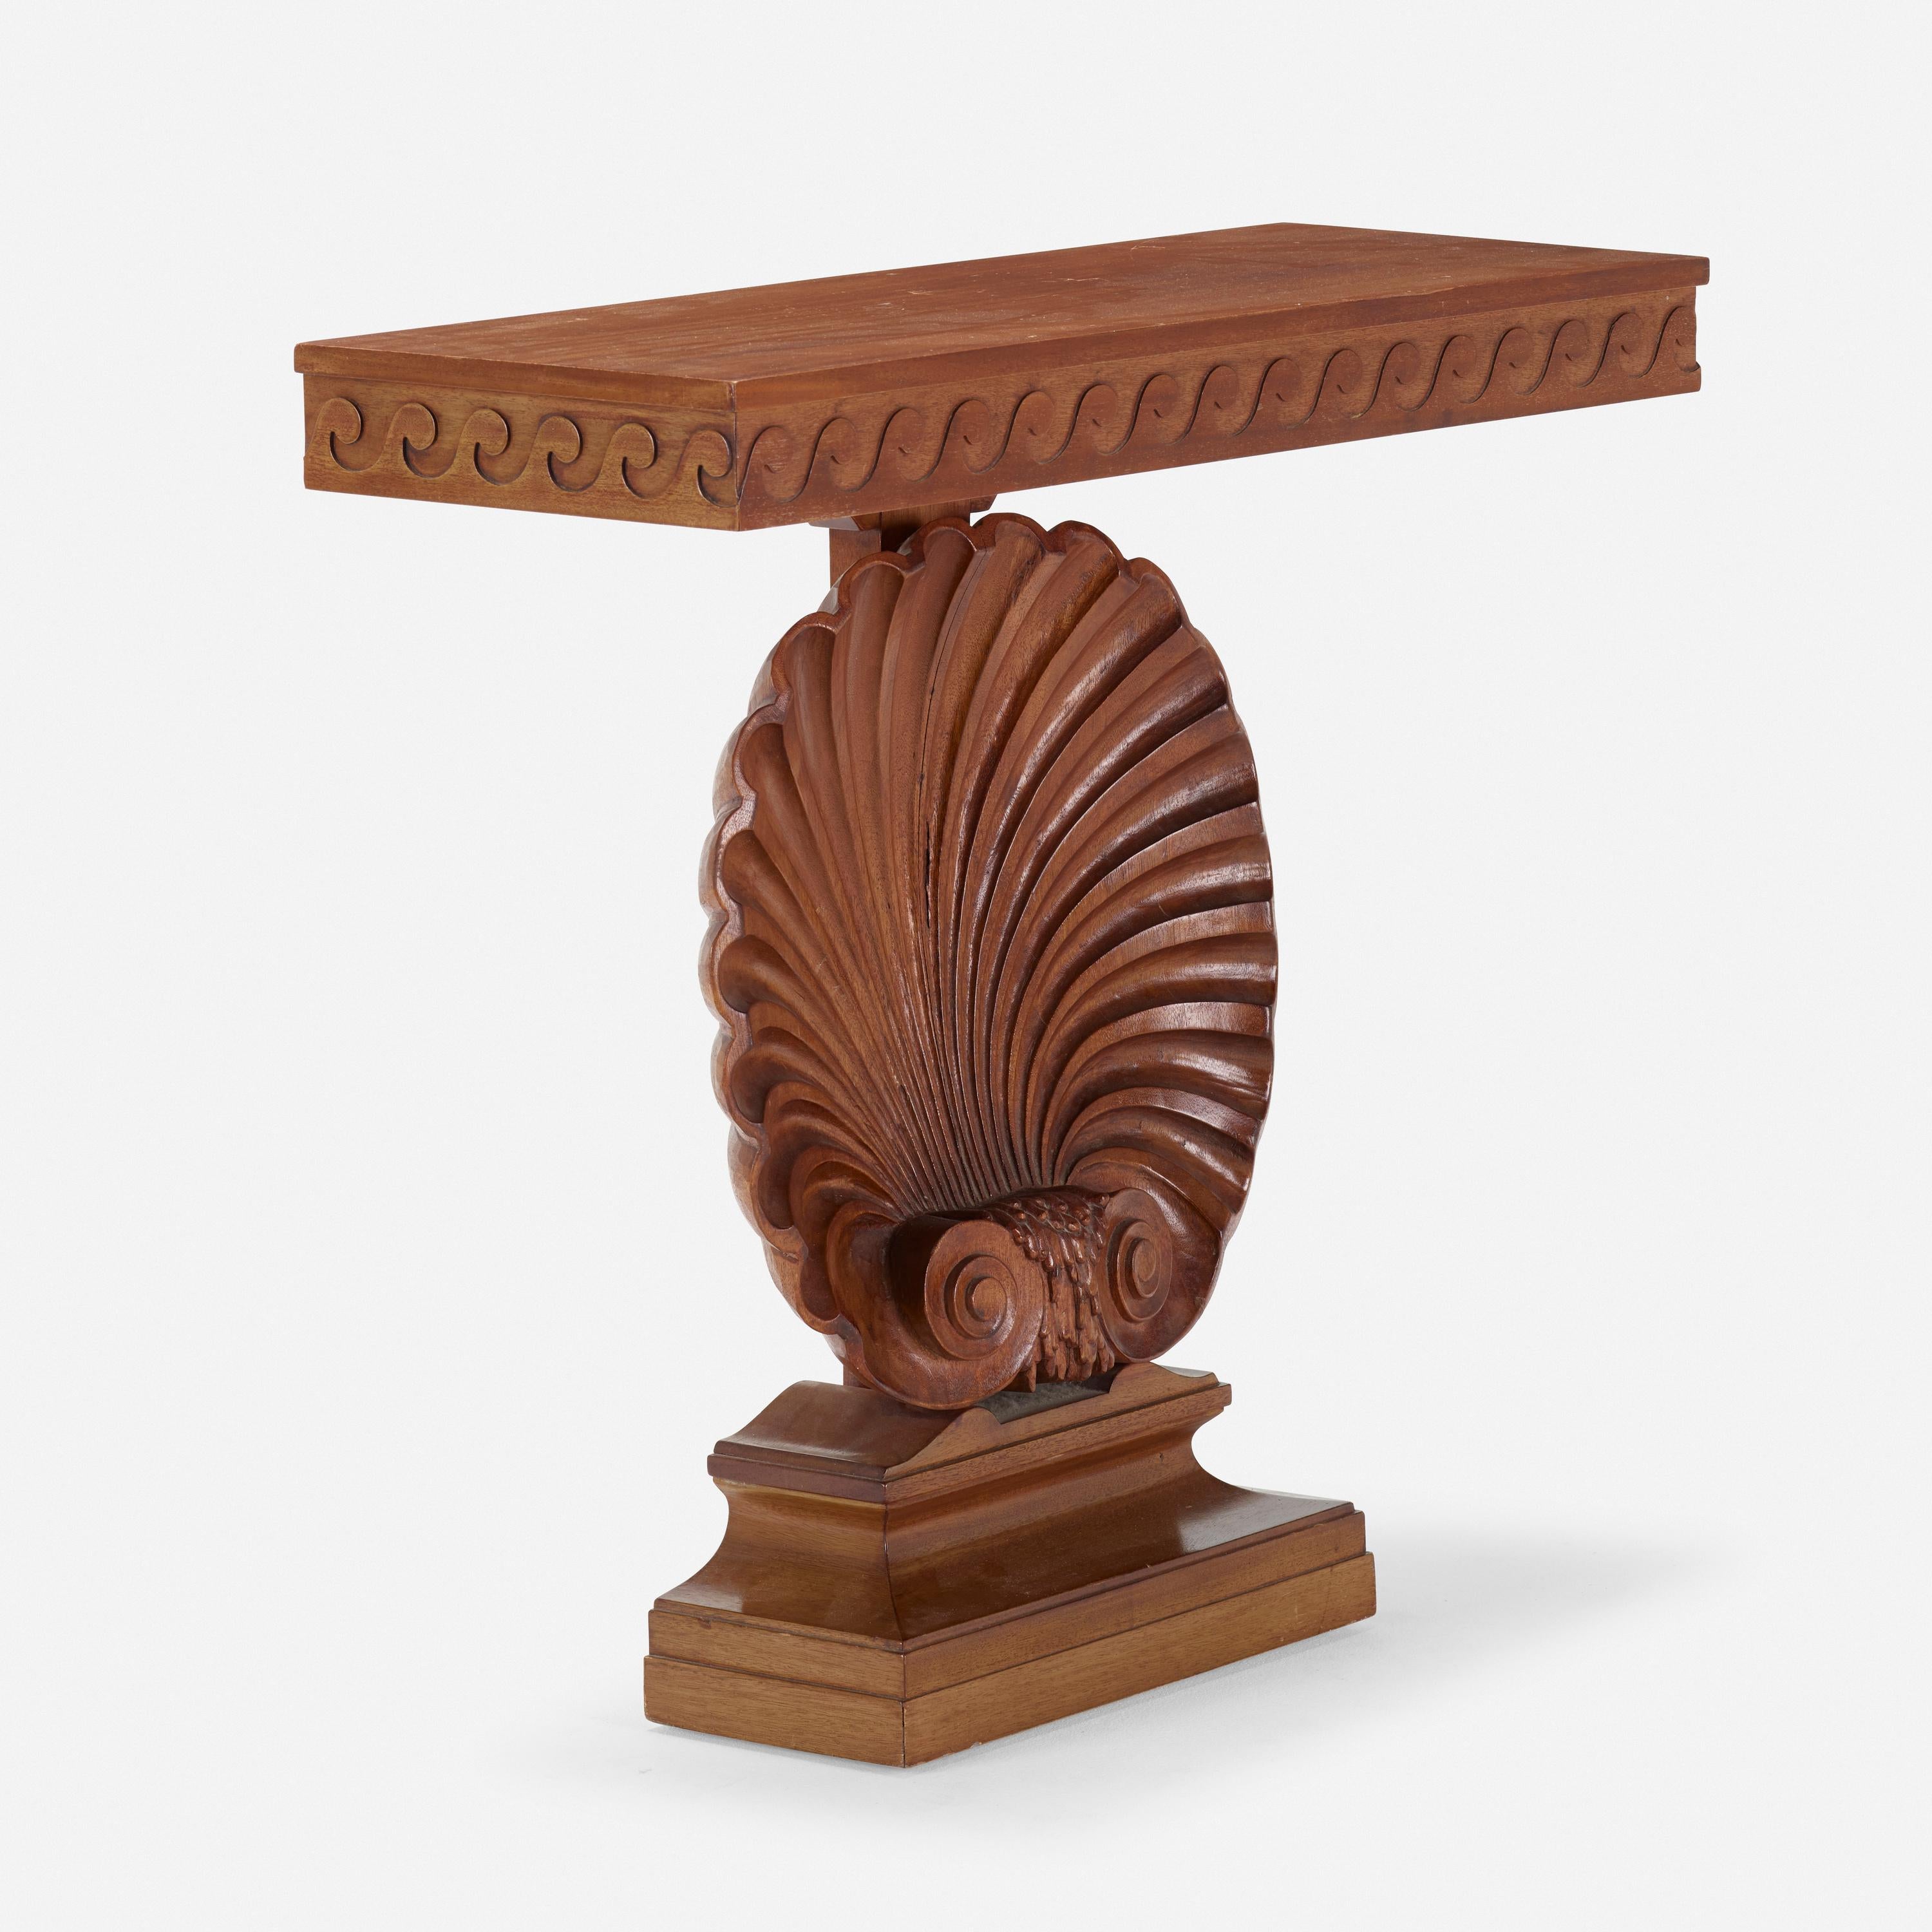 Mahogany shell console table model #3050 by Edward Wormley for Dunbar
with stappled label: 